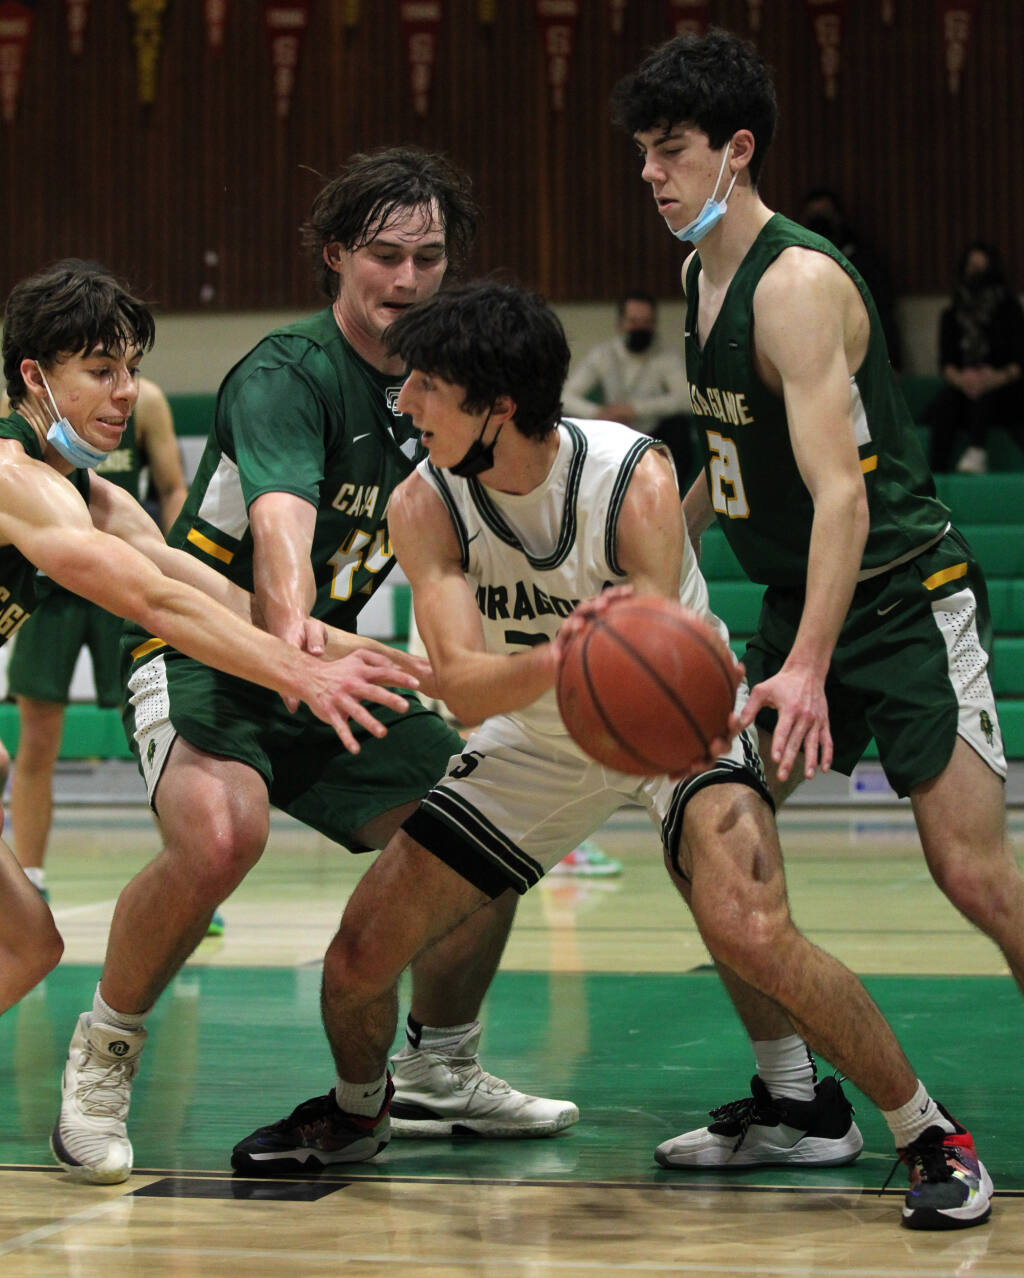 Sonoma Valley's Dom Girish (20) passes the ball around Casa Grande's defense in the third quarter of basketball at Sonoma Valley High School, in Sonoma, Calif., on Thursday, January 20, 2022. (Photo by Darryl Bush / For The Press Democrat)